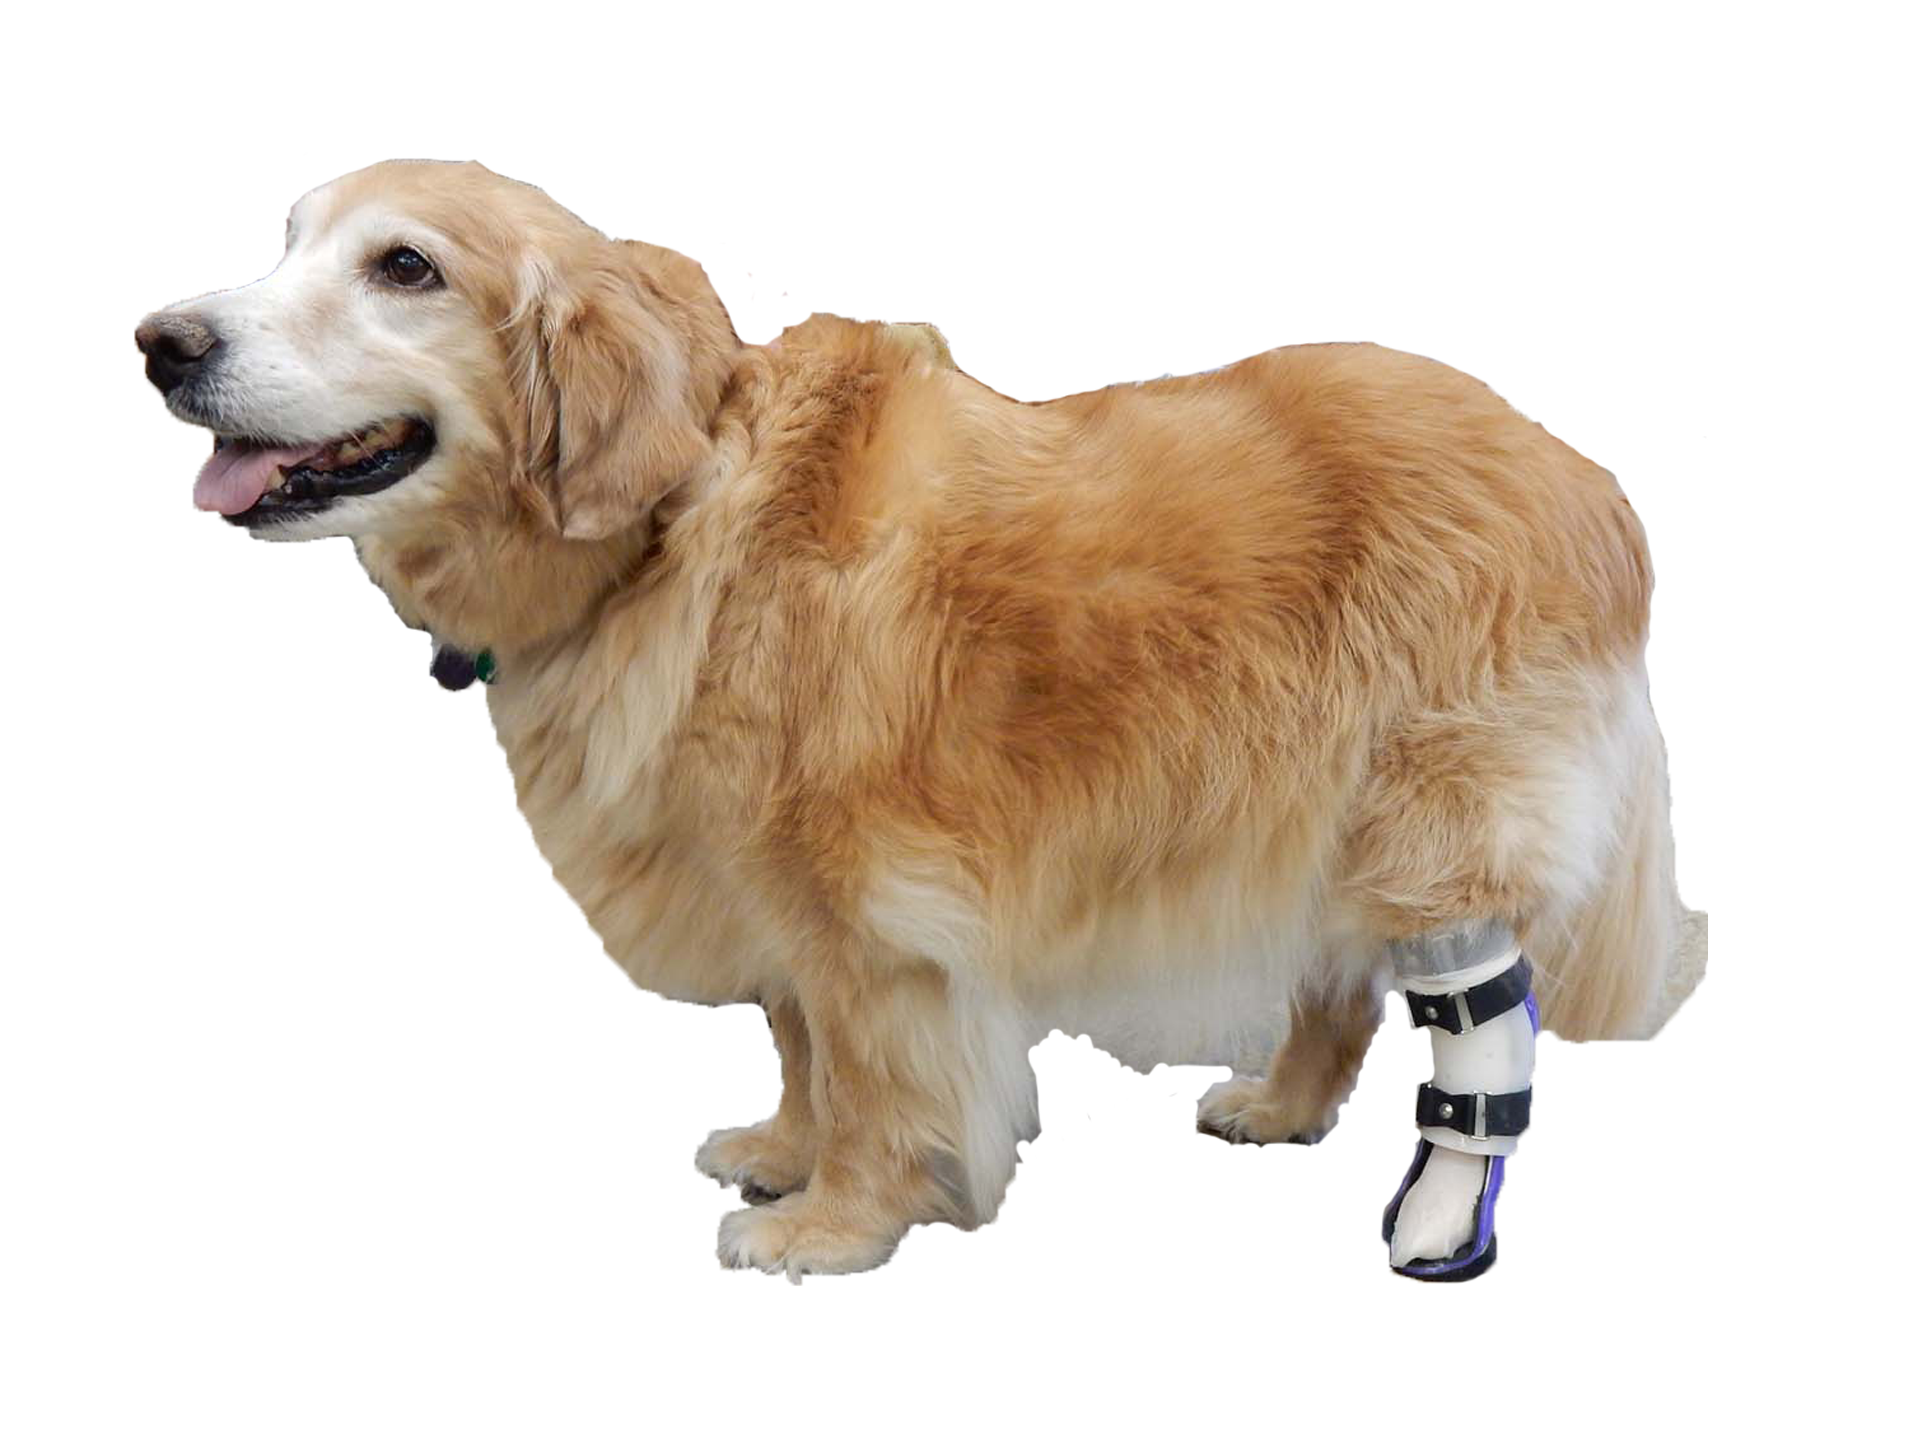 A long-haired golden-colored dog wearing a custom hock brace with a shell